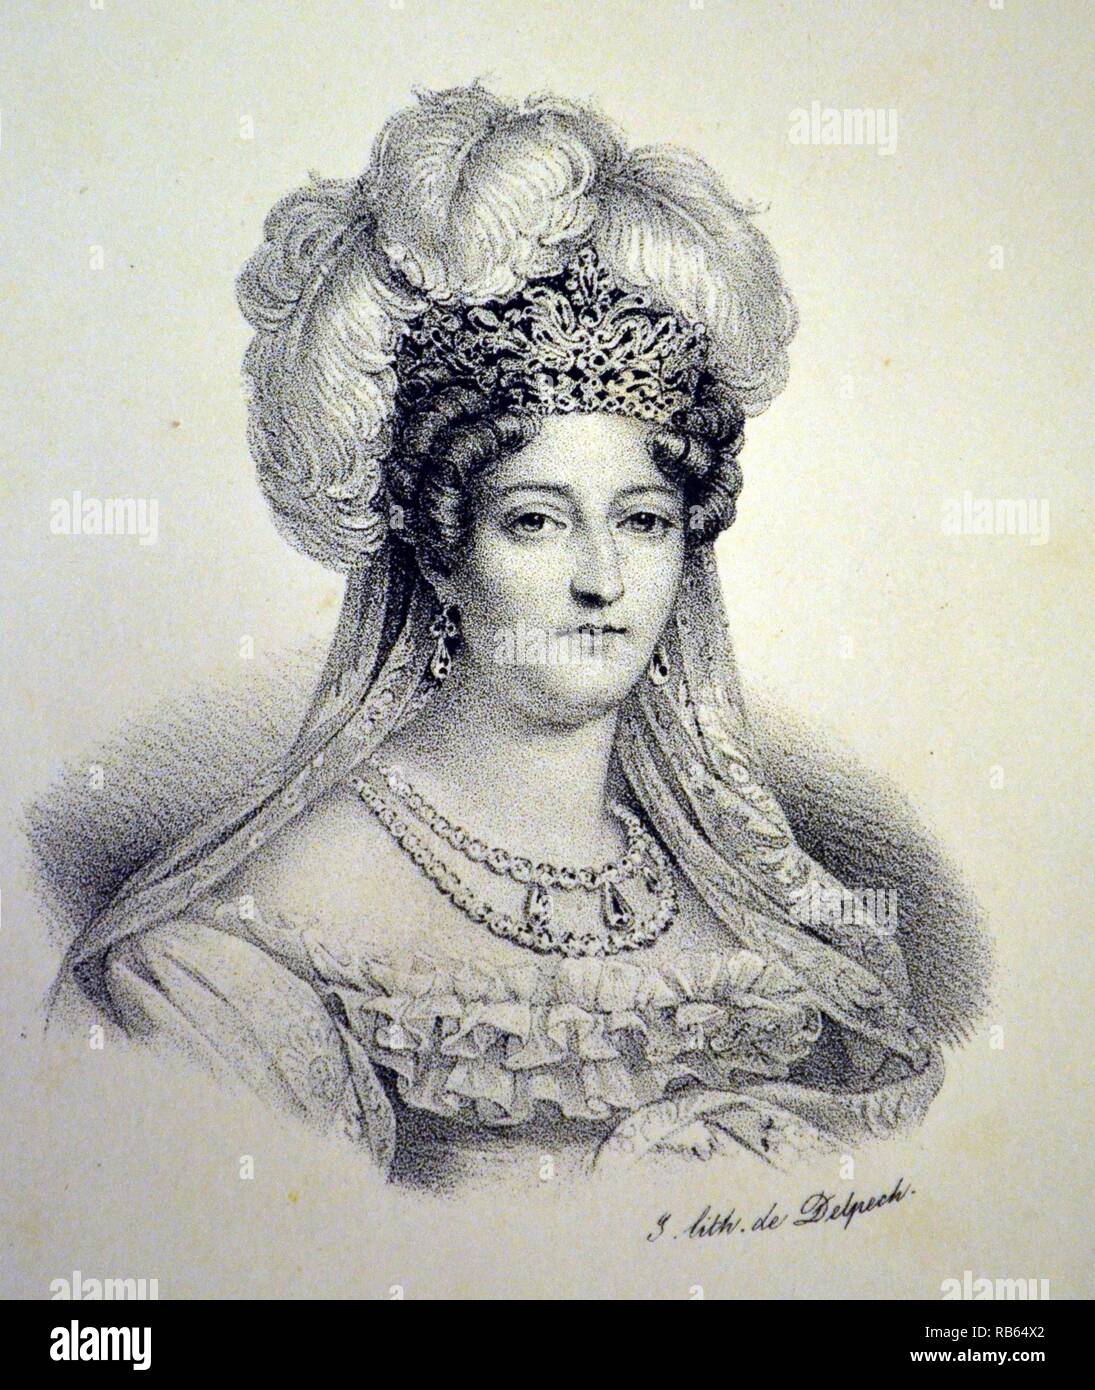 Marie Therese Charlotte, Duchess of Angouleme (1778-1851) edest child of Louis XVI of France. As wife of the heir apparent she was known as La Dauphine after the Bourbon Restoration in 1814 until the 1830 Revolution. Lithograph, Paris, c1840. Stock Photo